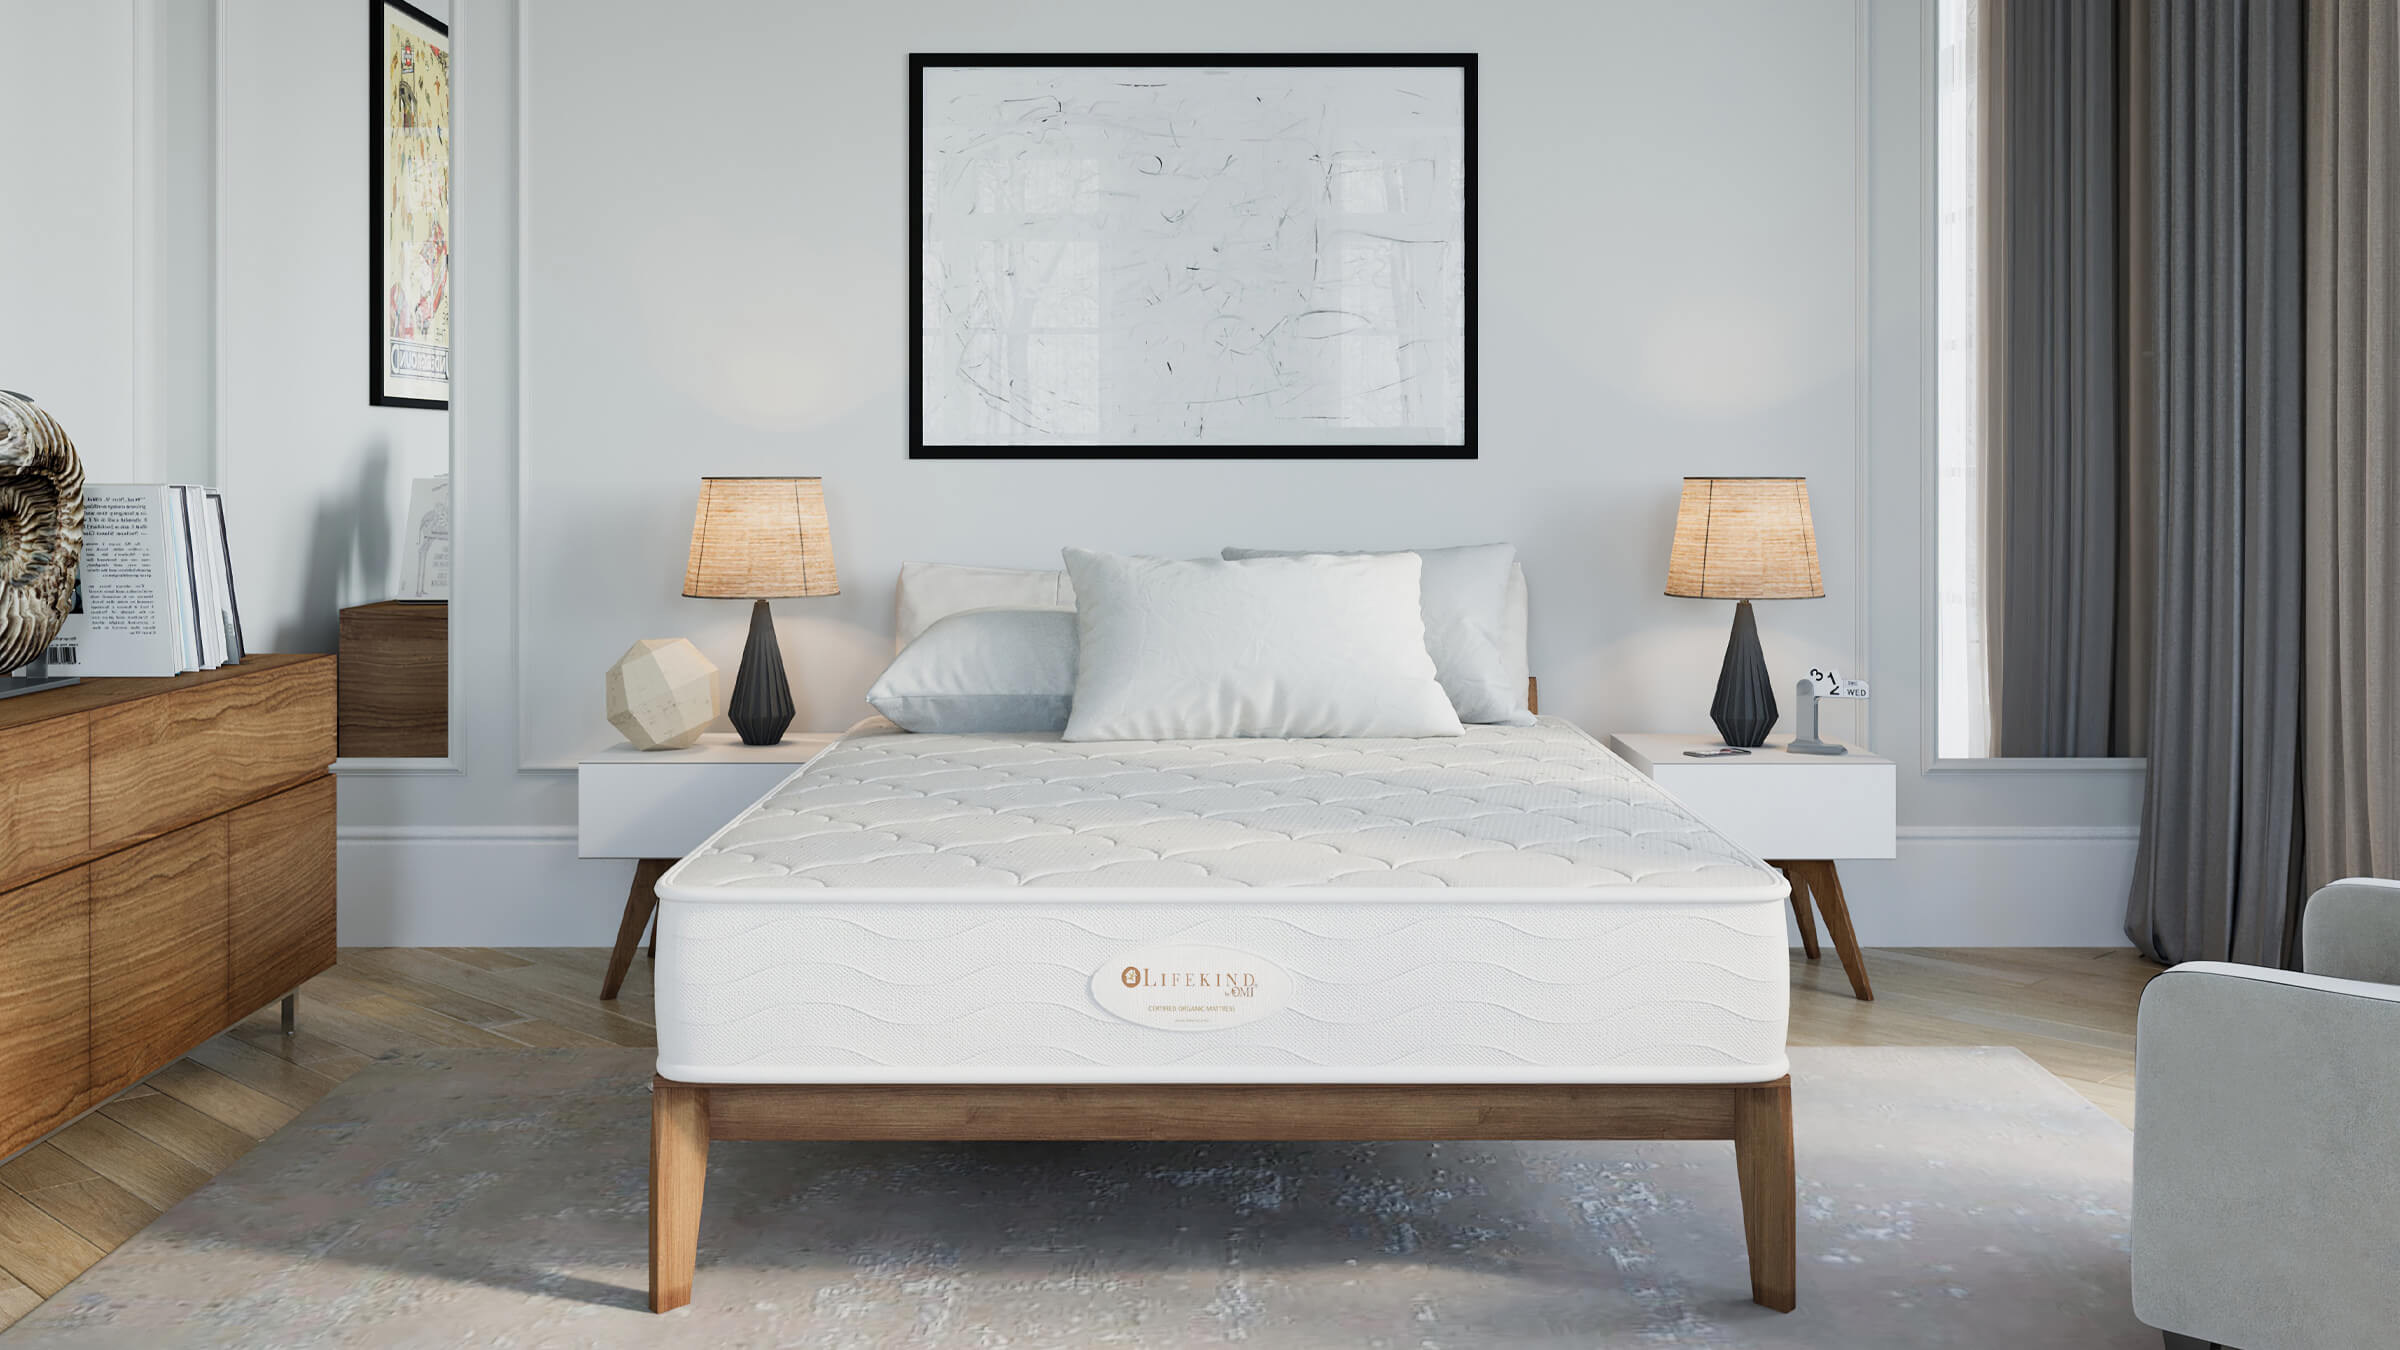 Lifestyle Render for a Mattress Company